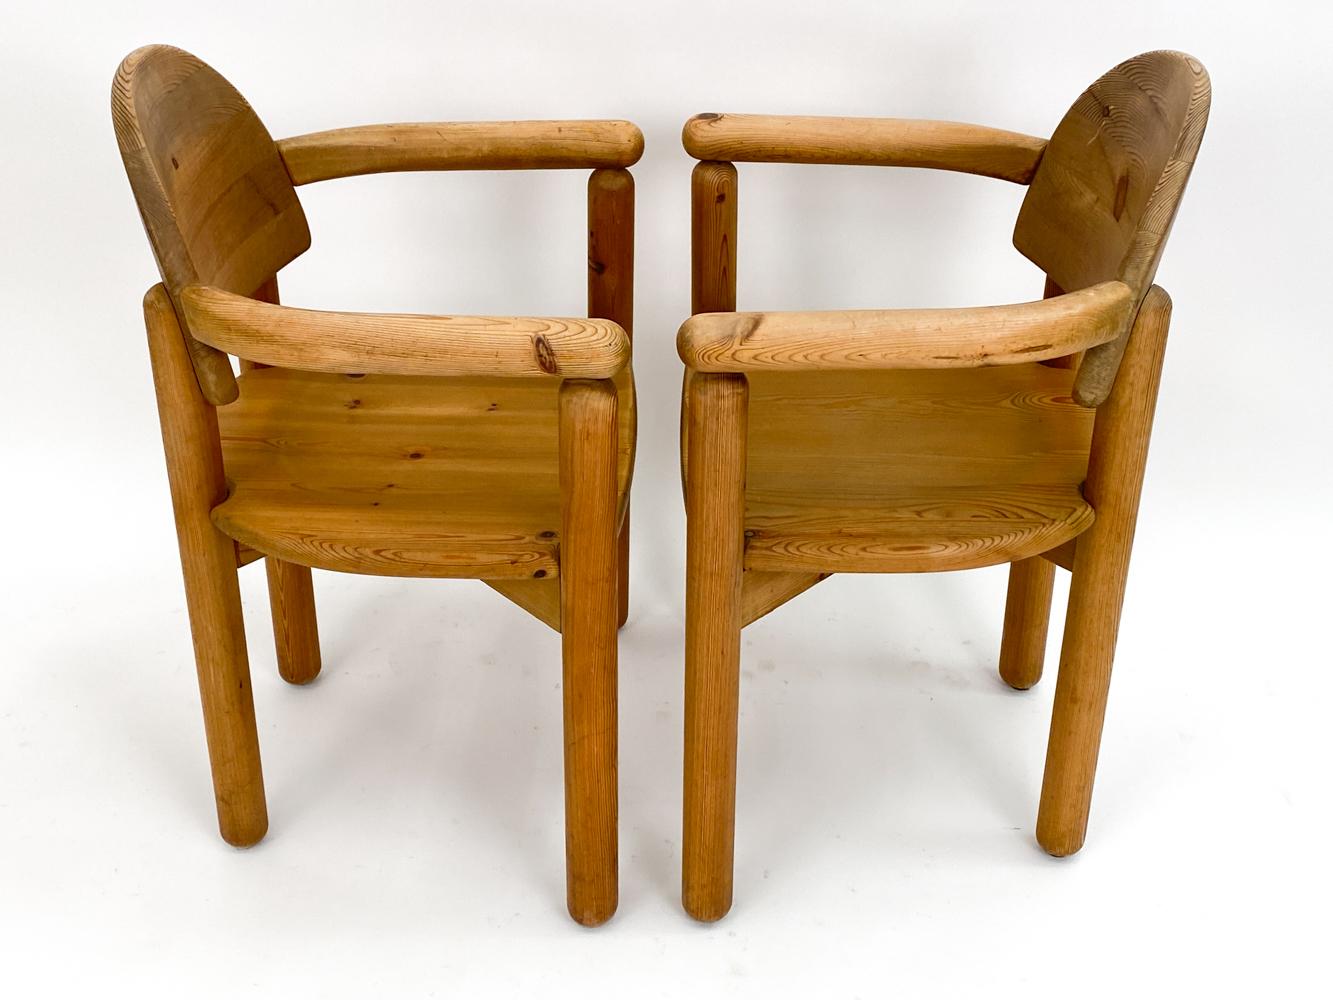  Pair of Pine Armchairs by Rainer Daumiller, Denmark, circa 1980 For Sale 4